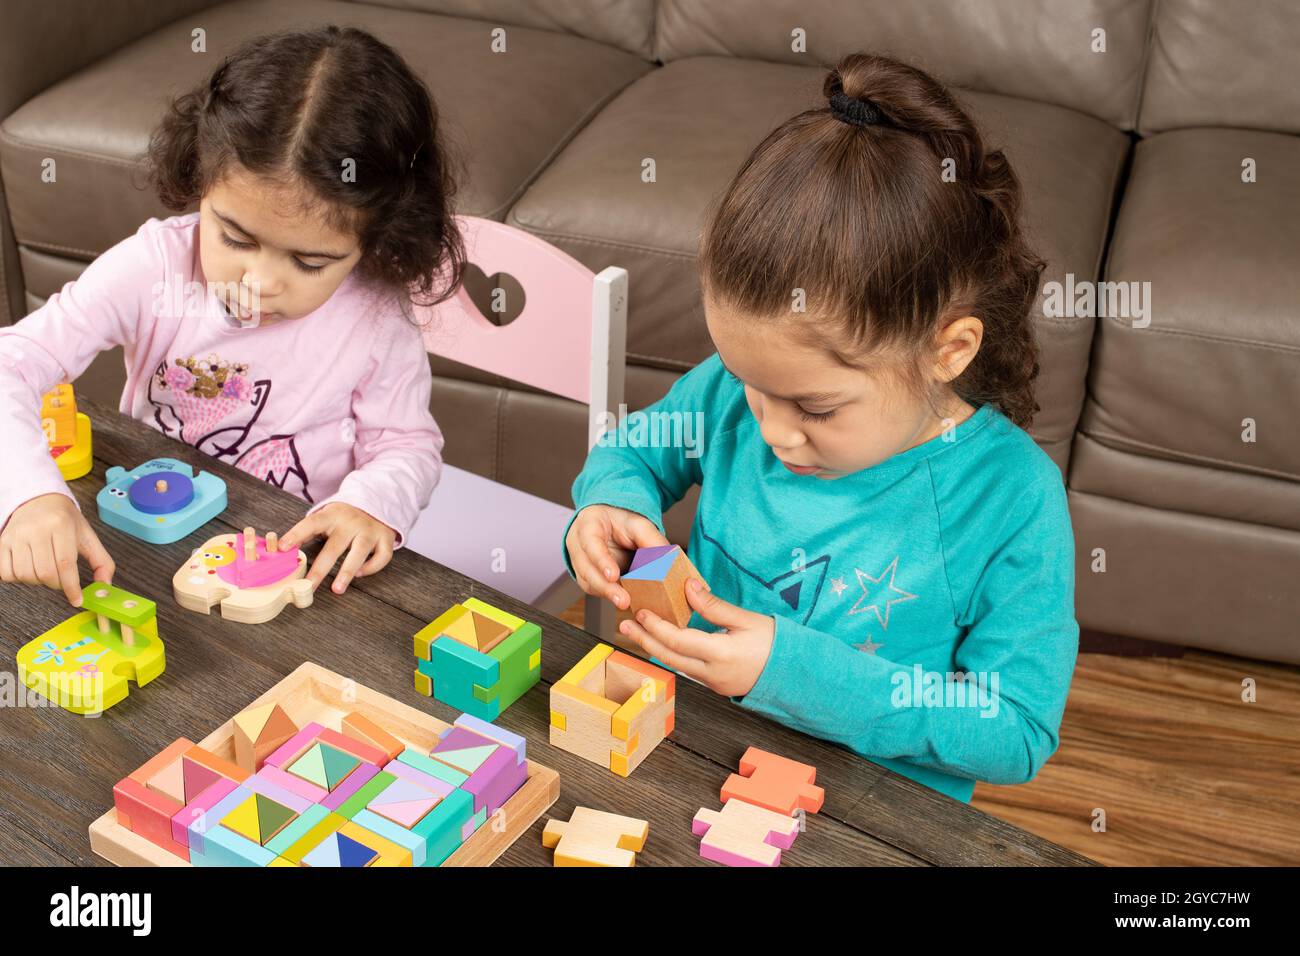 Five year old girl working on complex geometric shapes activity while three year old sister plays next to her with simpler geometric shapes puzzle Stock Photo